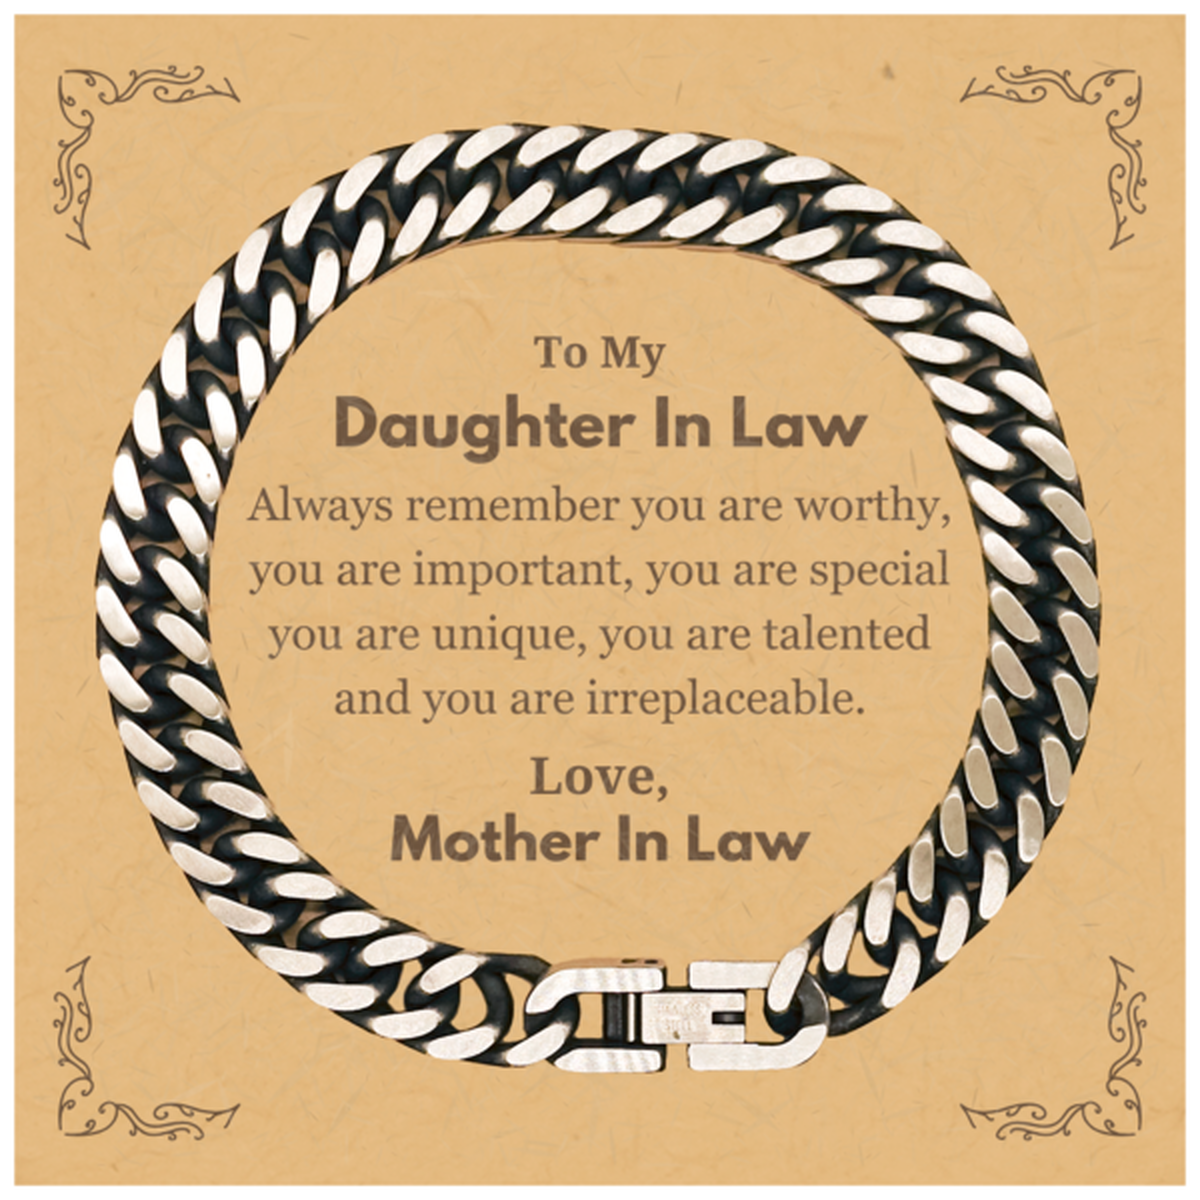 Daughter In Law Birthday Gifts from Mother In Law, Inspirational Cuban Link Chain Bracelet for Daughter In Law Christmas Graduation Gifts for Daughter In Law Always remember you are worthy, you are important. Love, Mother In Law